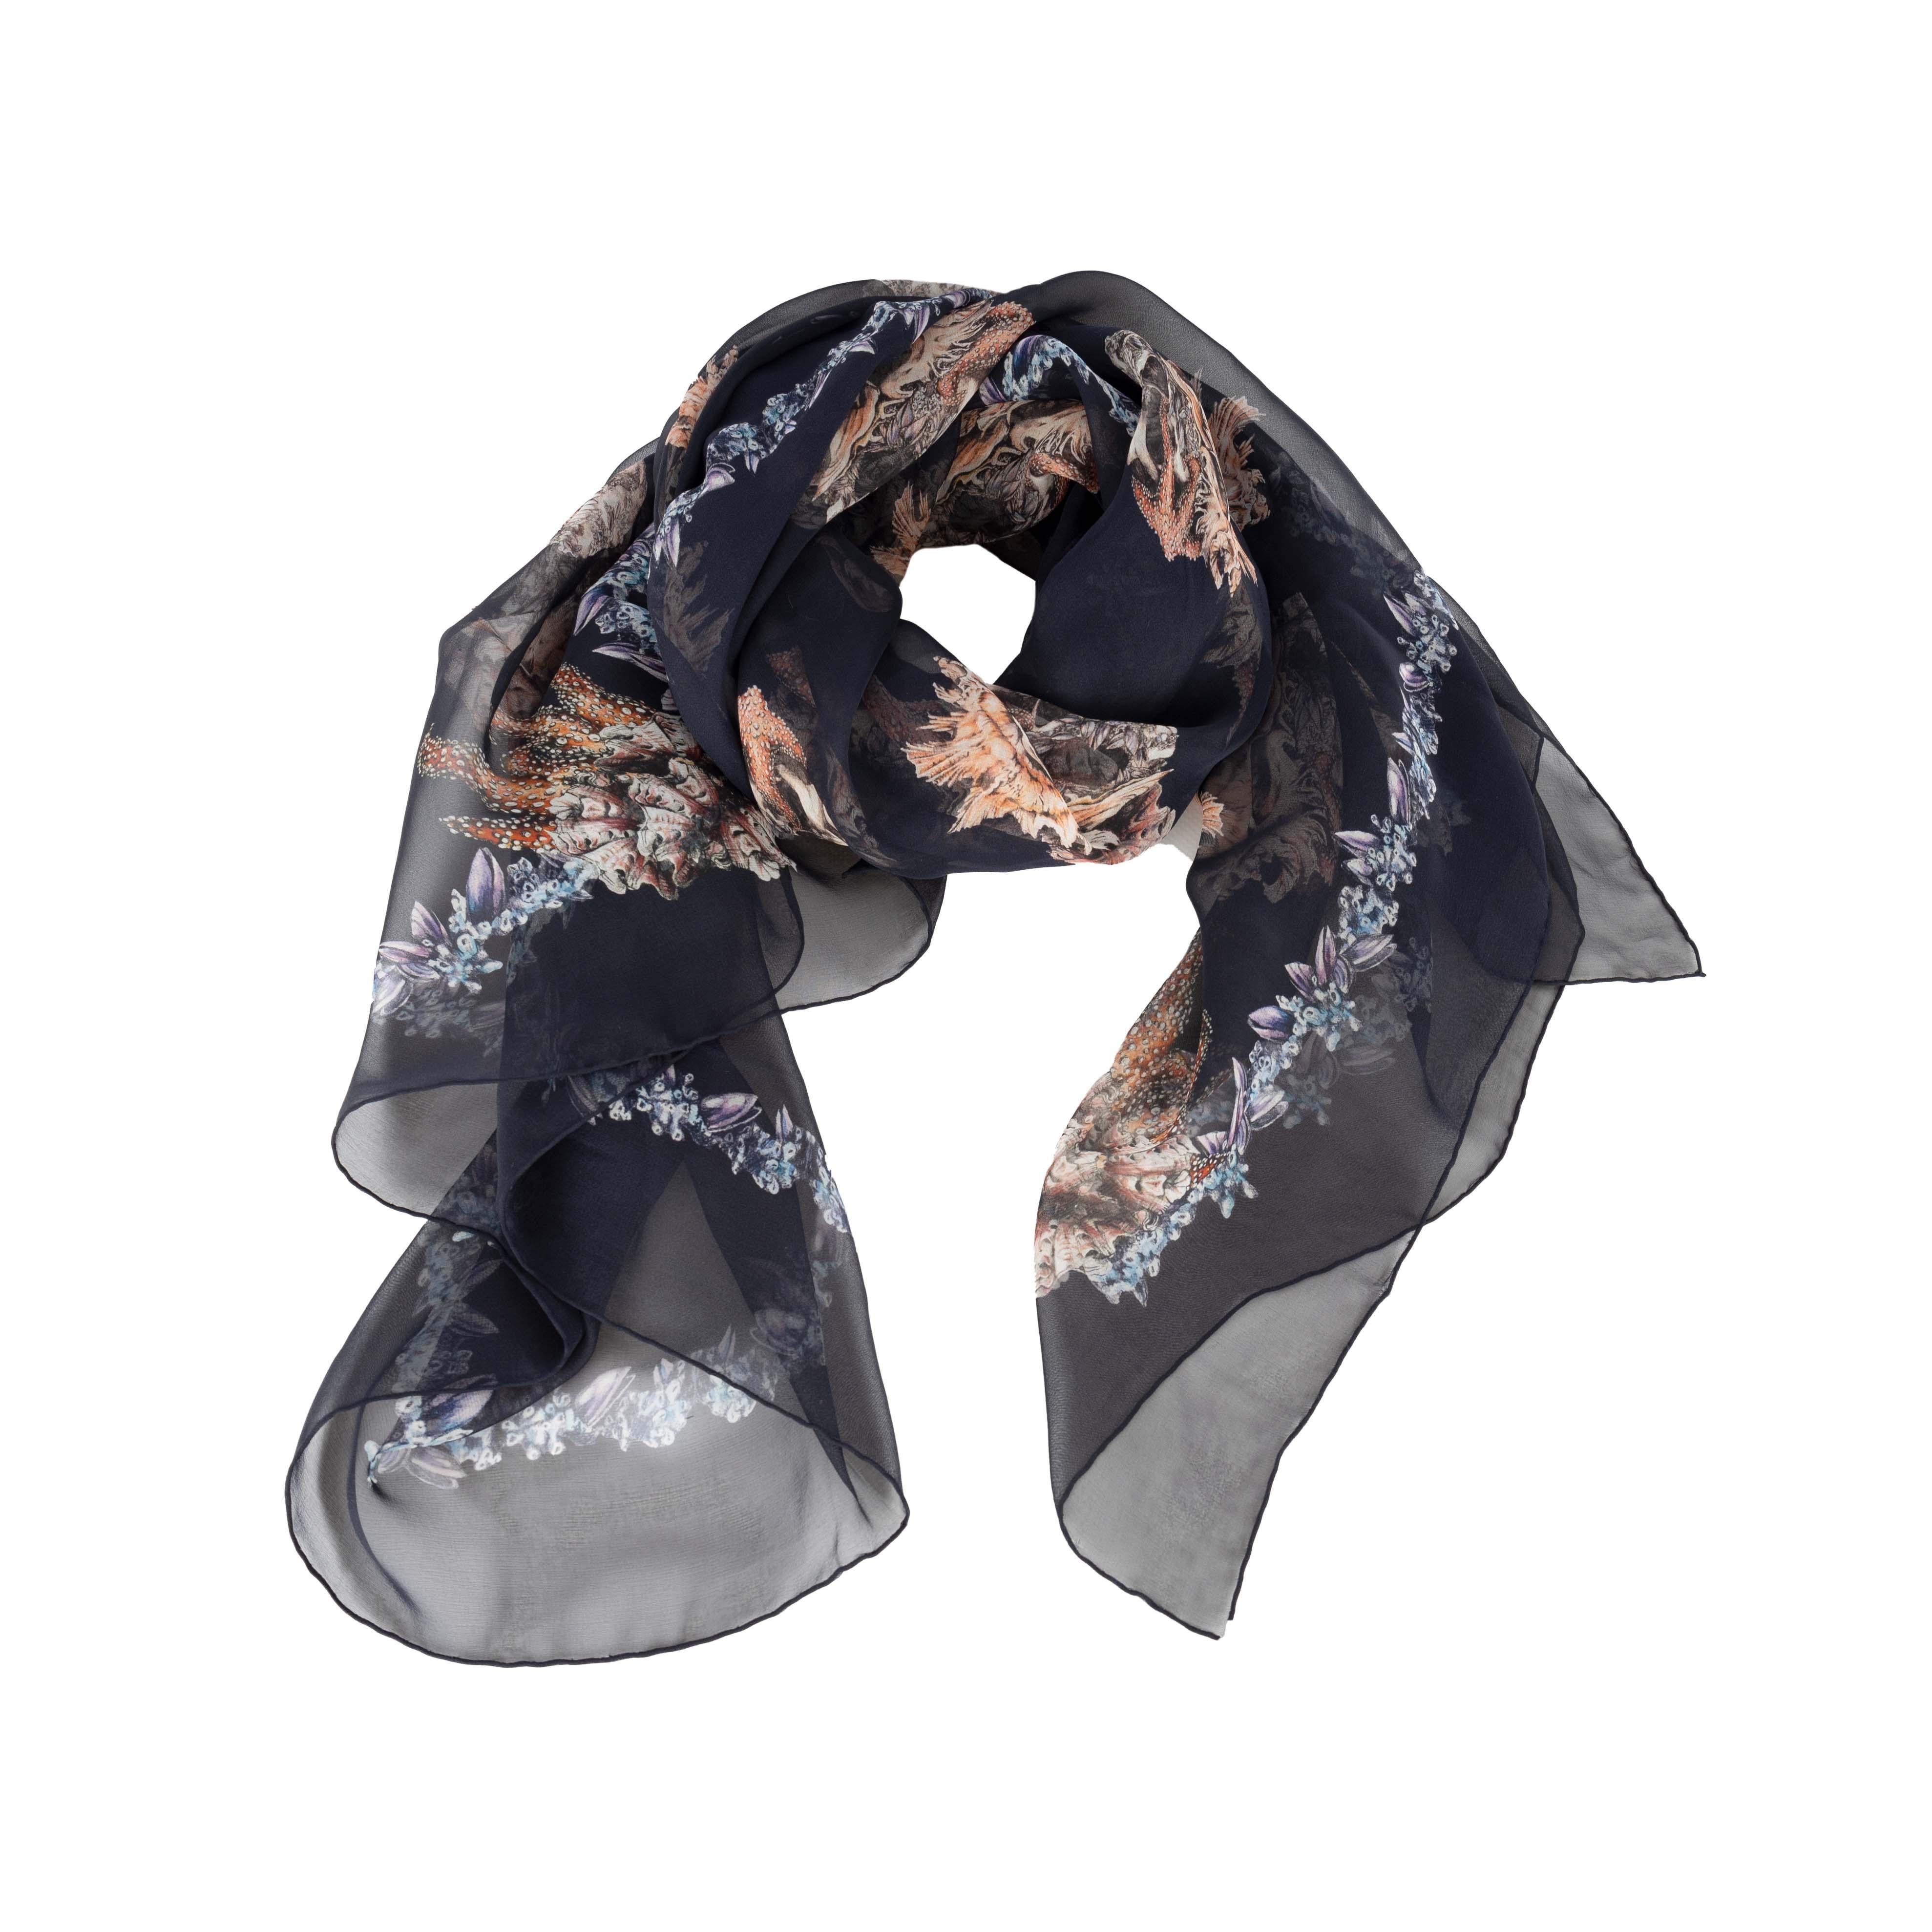 Alexander McQueen sheer silk scarf adorned with the brand's iconic skull motif and sea creature print. The scarf perfectly combines luxe fashion with gothic symbolism and is sure to add a rebellious edge to any outfit.